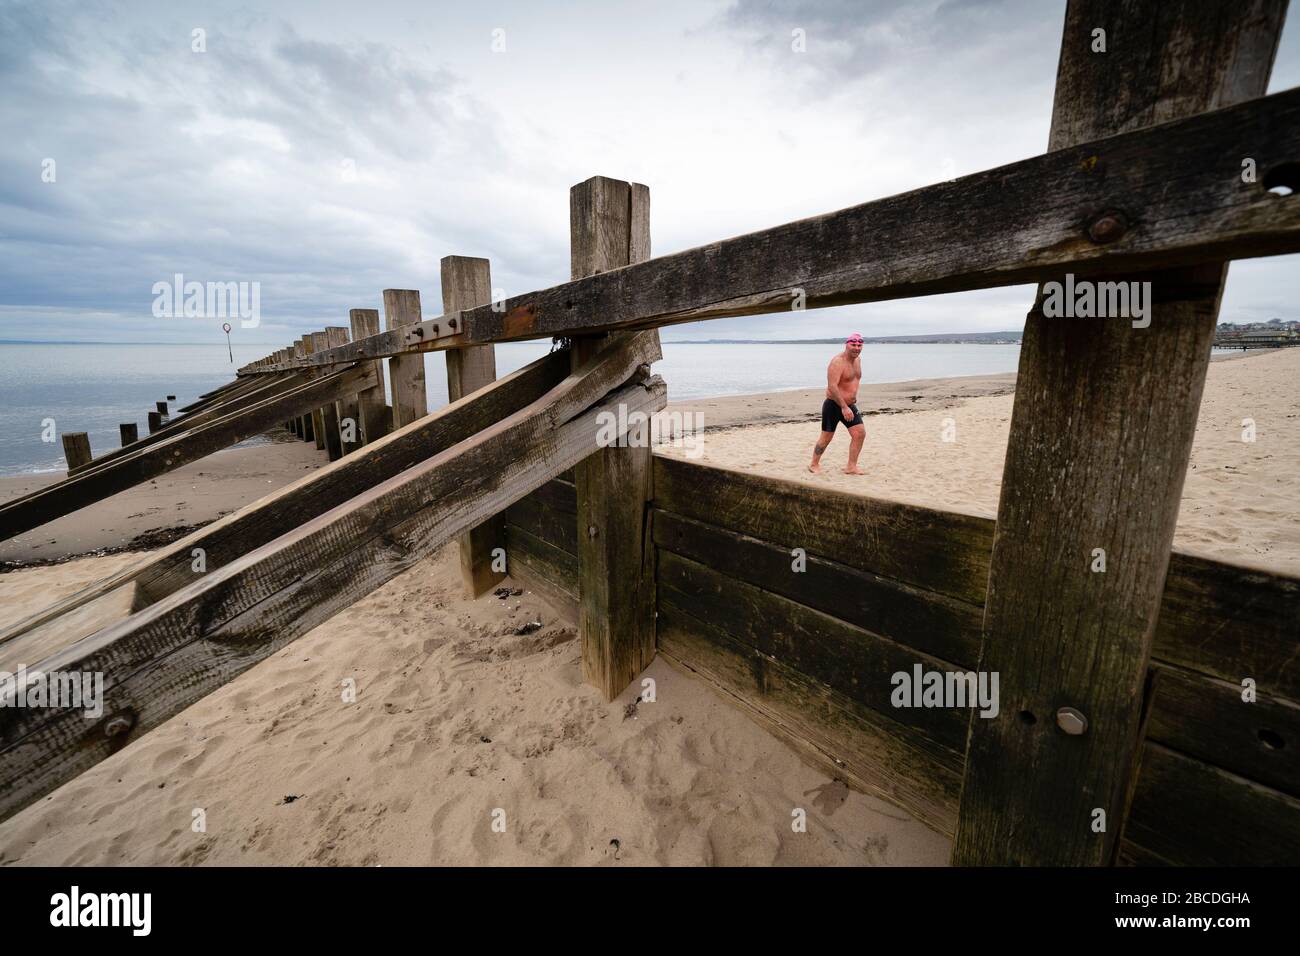 Portobello, Edinburgh, Scotland, UK. 4 April, 2020. On the second weekend of the coronavirus lockdown in the UK, Paul Edwards from Portobello takes his daily allowable outdoor exercise by open water swimming 1400m in the Firth of Forth. Iain Masterton/Alamy Live News Stock Photo